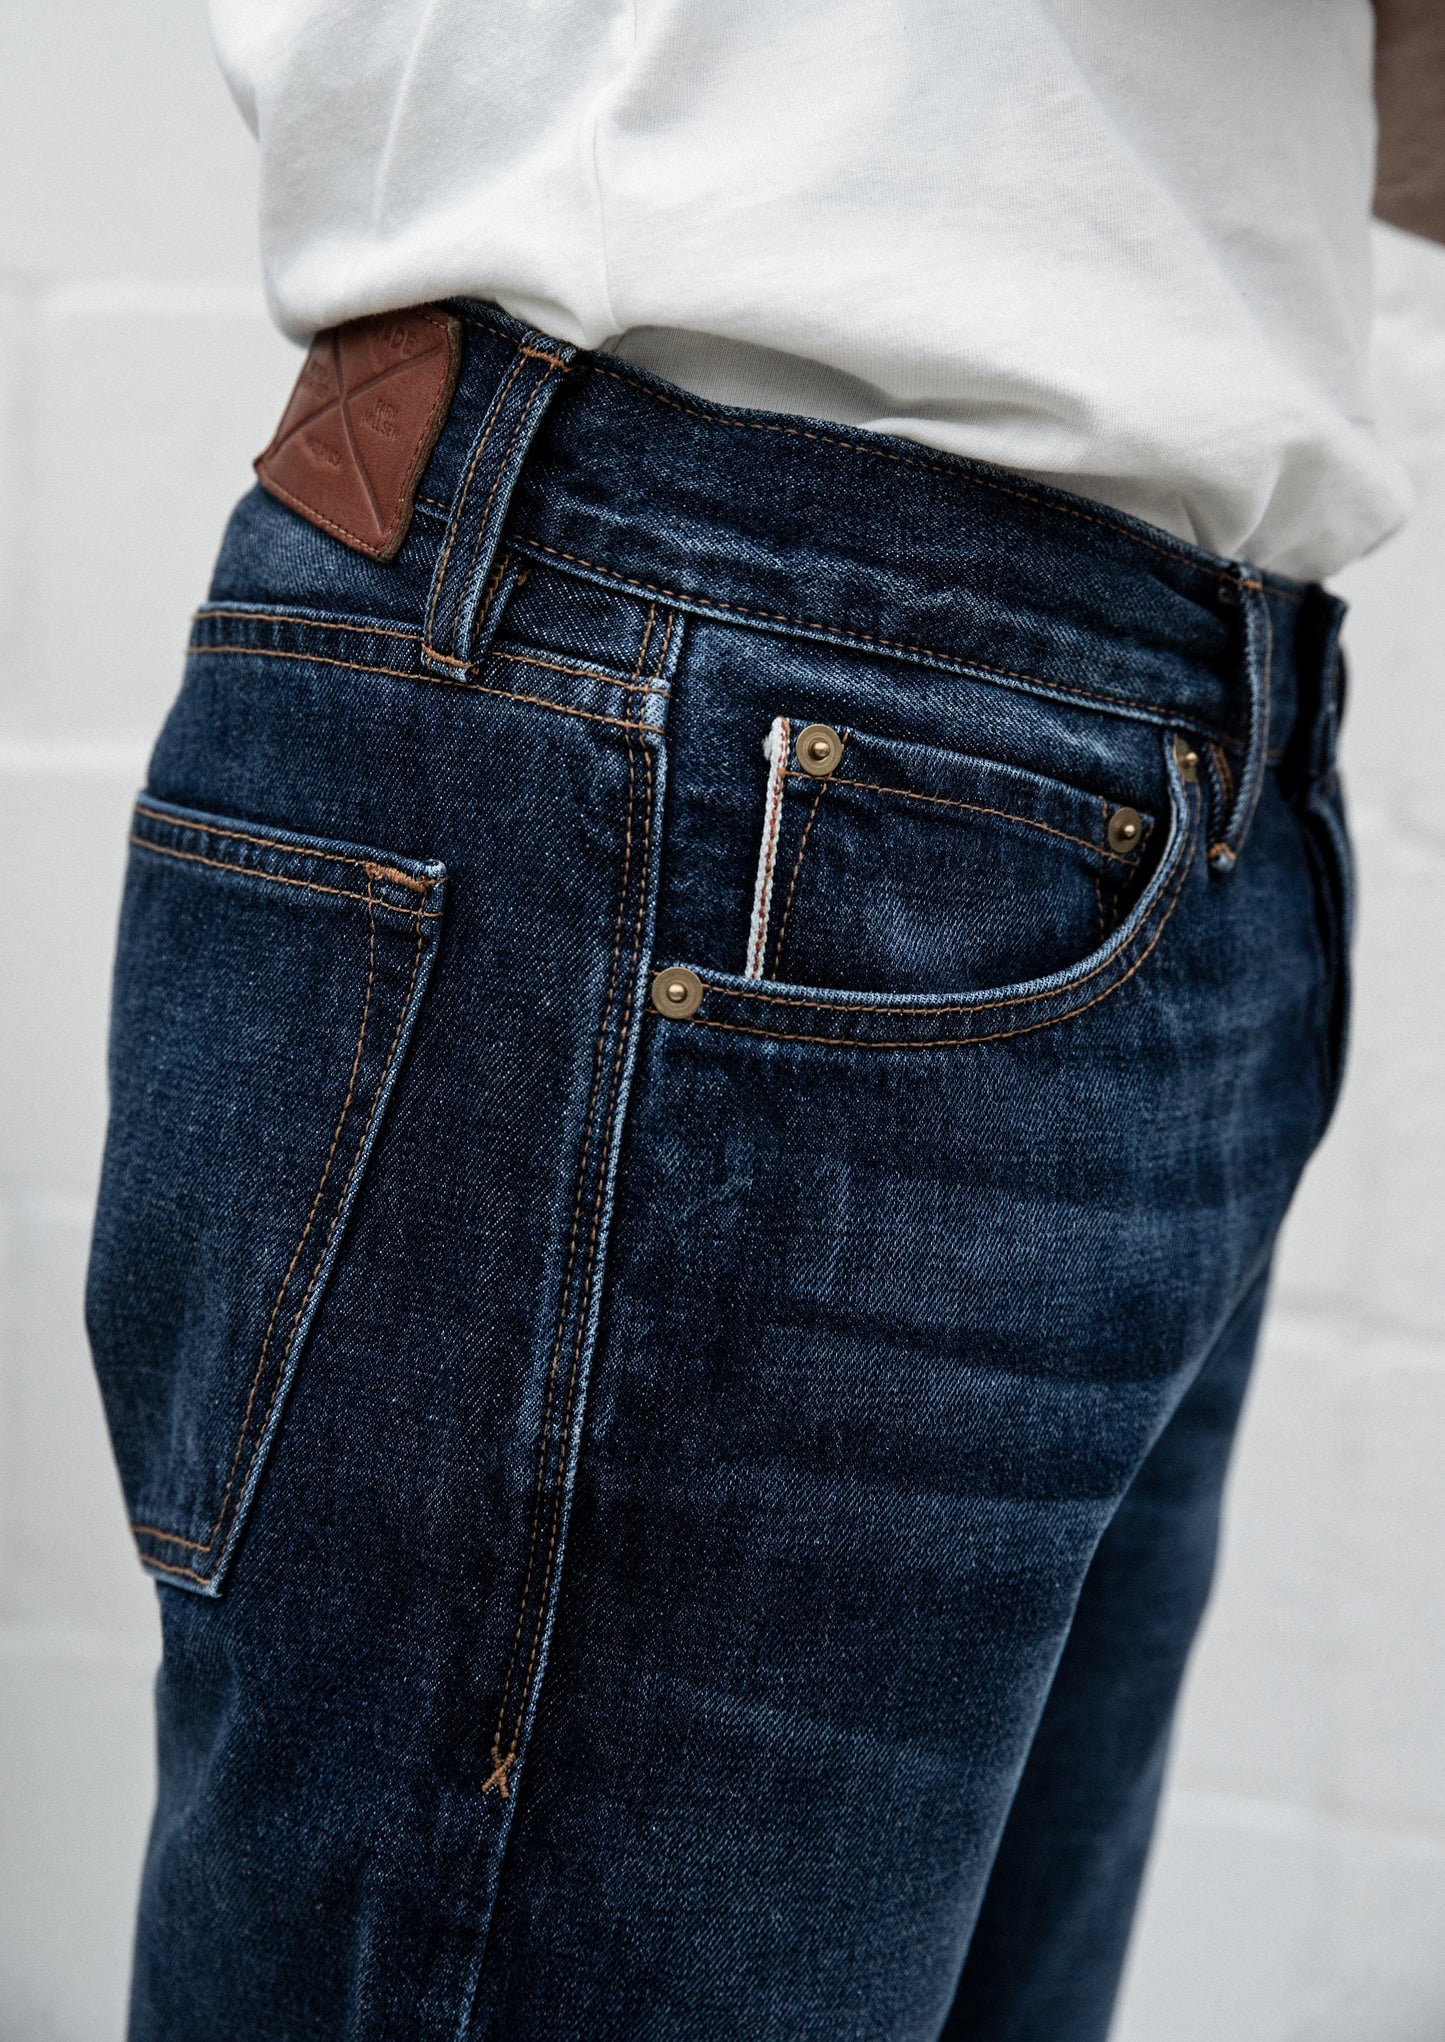 Jack Fit Jeans | Washed Selvedge Denim Straight Cut